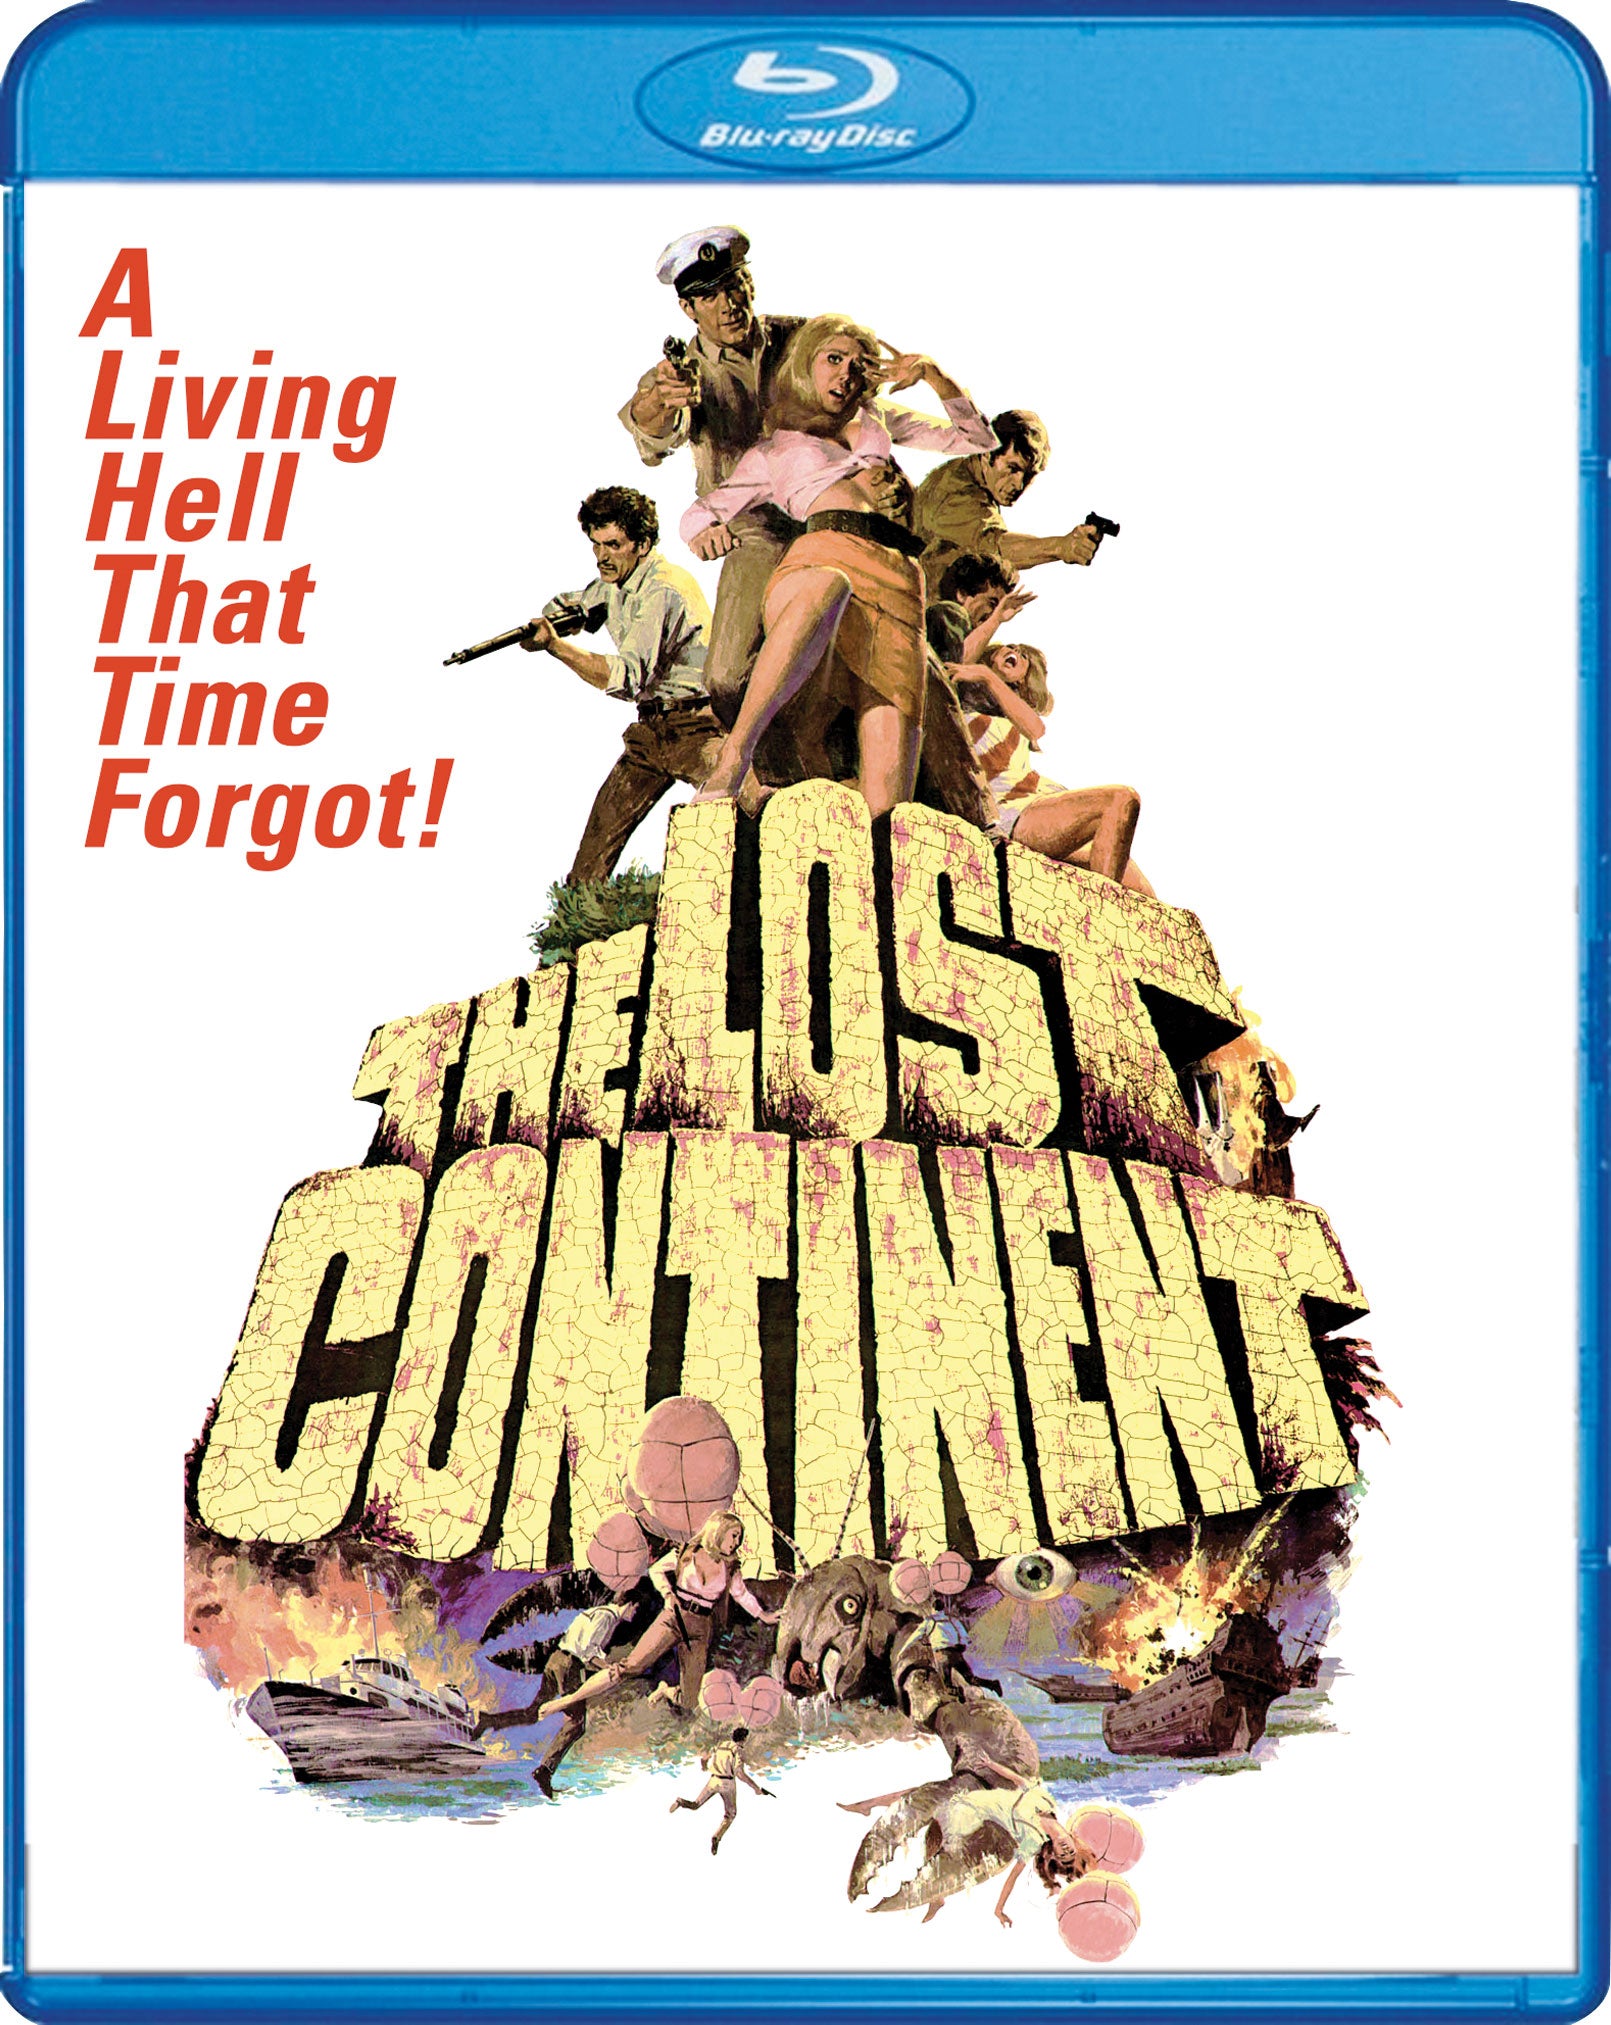 Lost Continent [Blu-ray] cover art